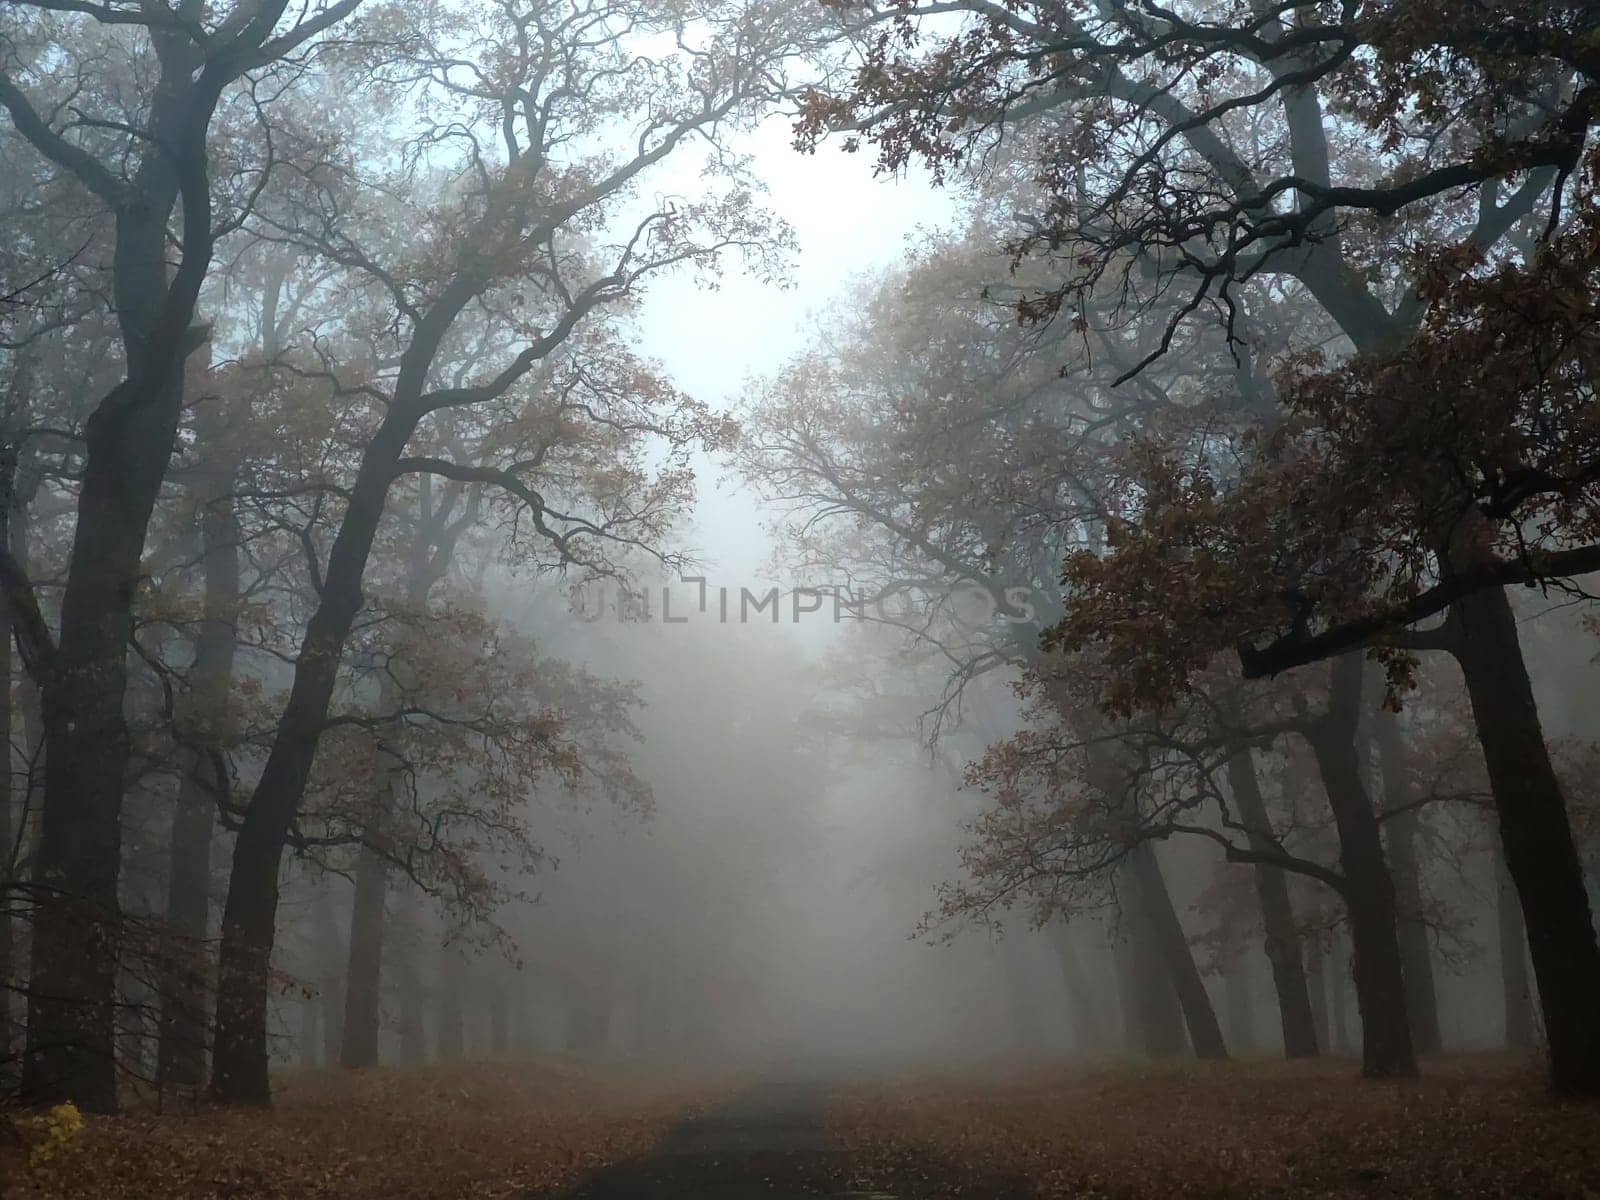 Cinematic shot of a foggy autumn day in a forest A road and trees decorated with autumn colors and covered in fog.